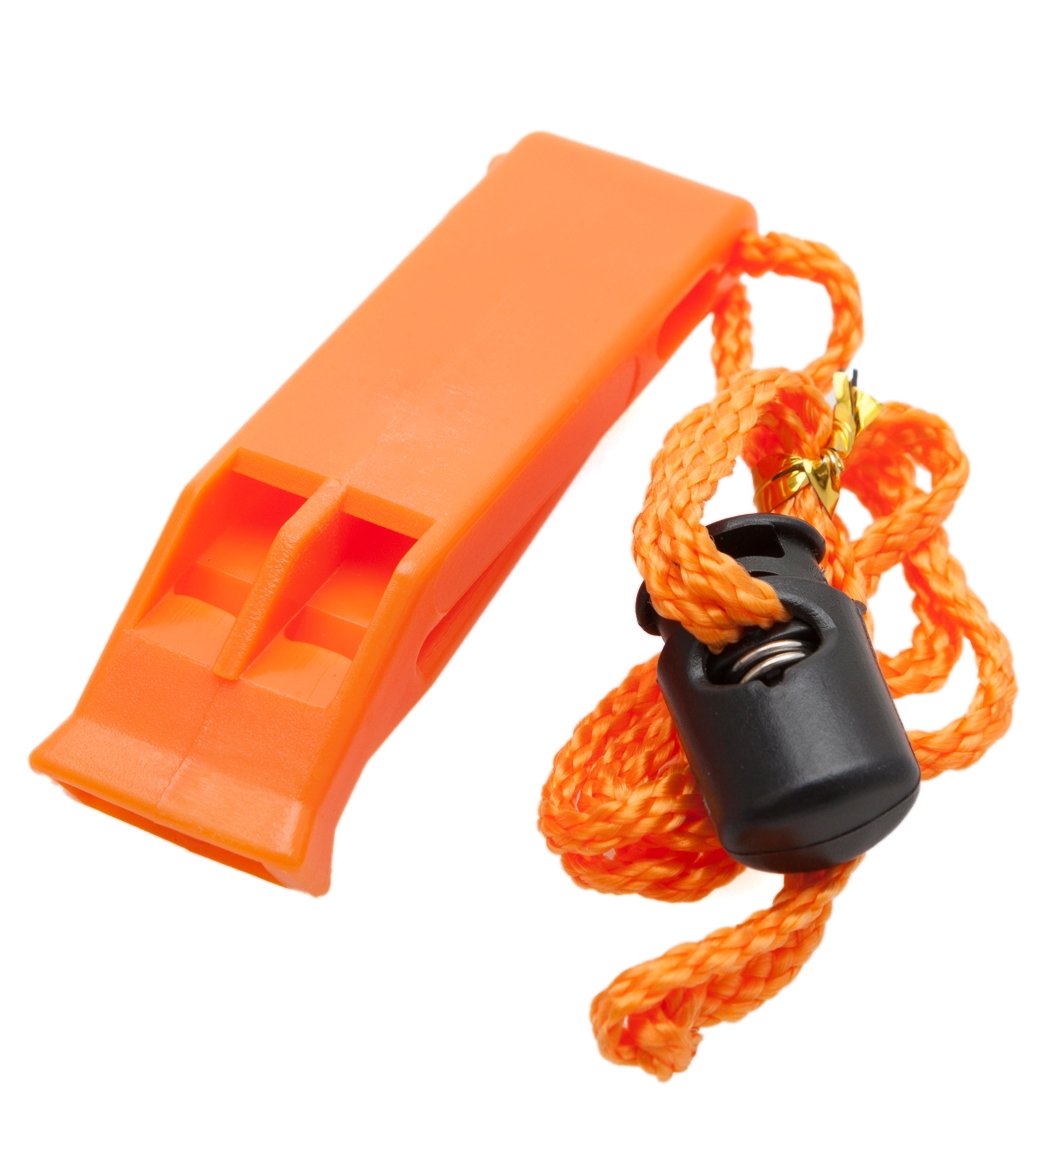 sol emergency whistle